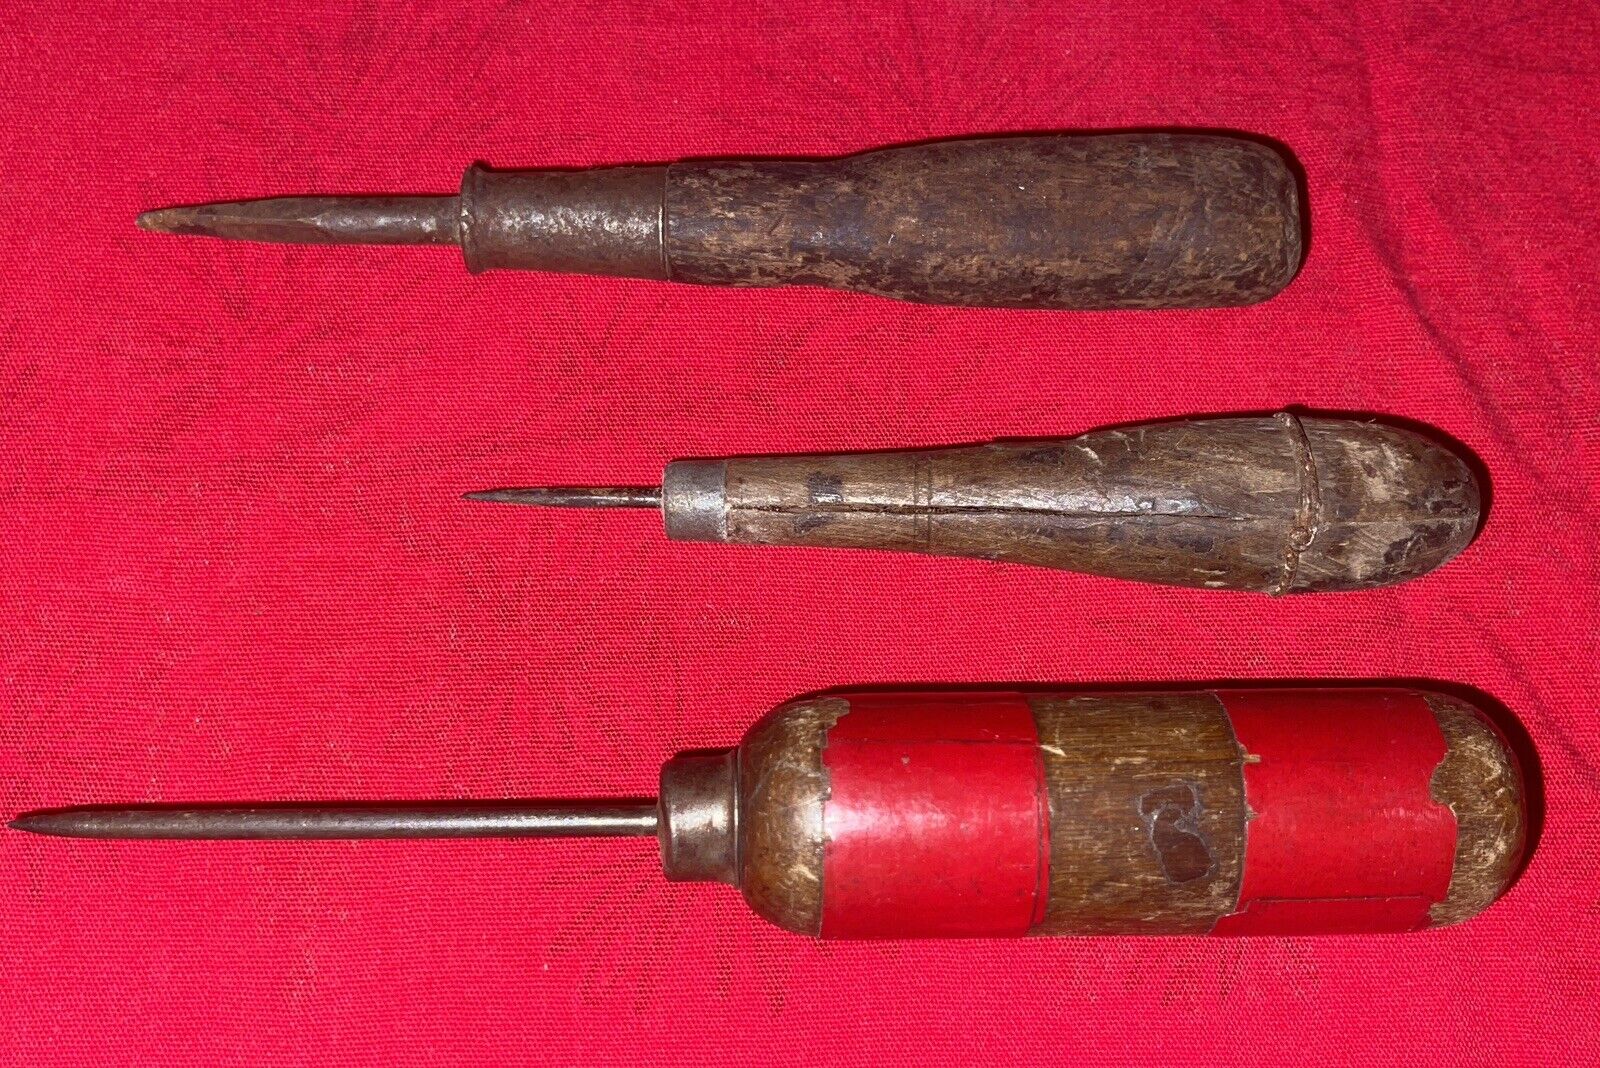 Ice Pick Awl Lot of 2 plus Handmade Tool Possibly Screwdriver